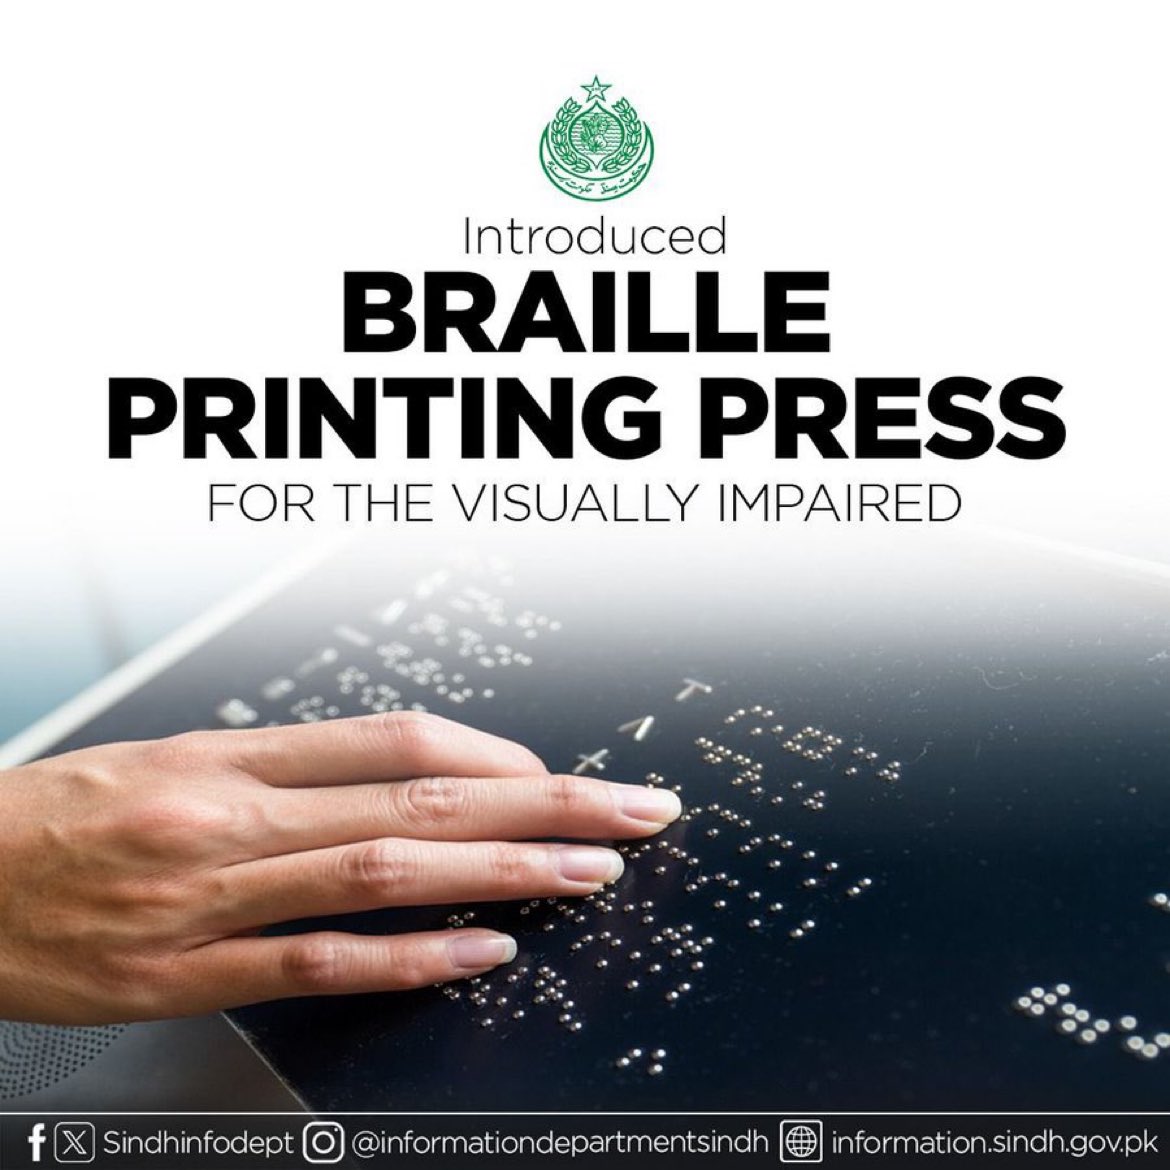 The Braille Printing Press in #Karachi is a beacon of inclusion, providing Braille books from Class 1 to 10th grade, ensuring every student has equal access to knowledge. This initiative is a testament to our commitment to #EducationForAll and demonstrates the value of